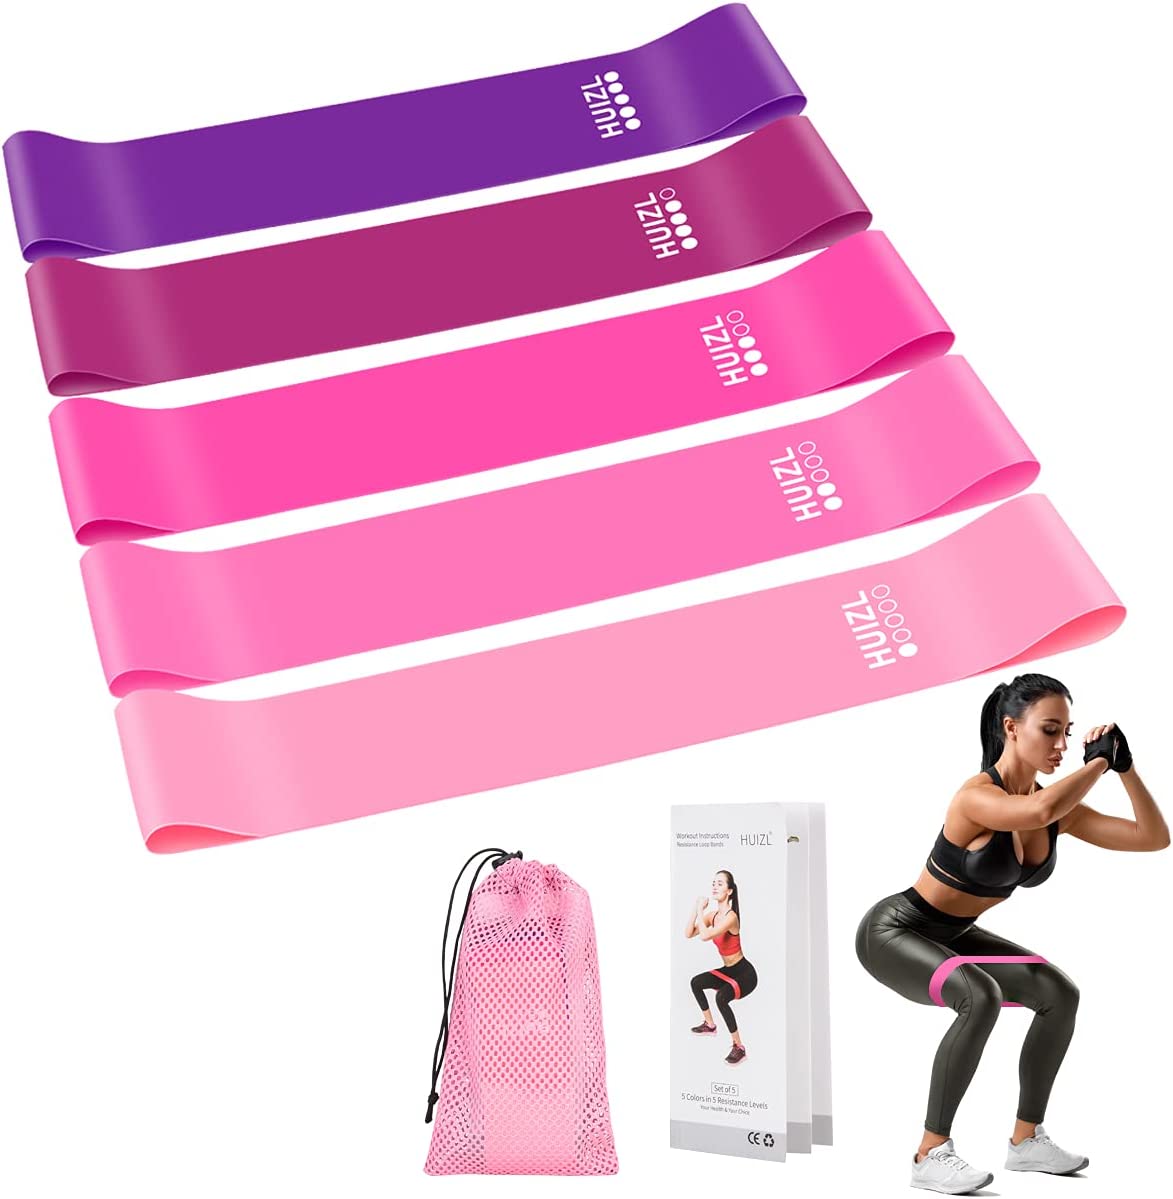 Fitness band, resistance bands for strength training